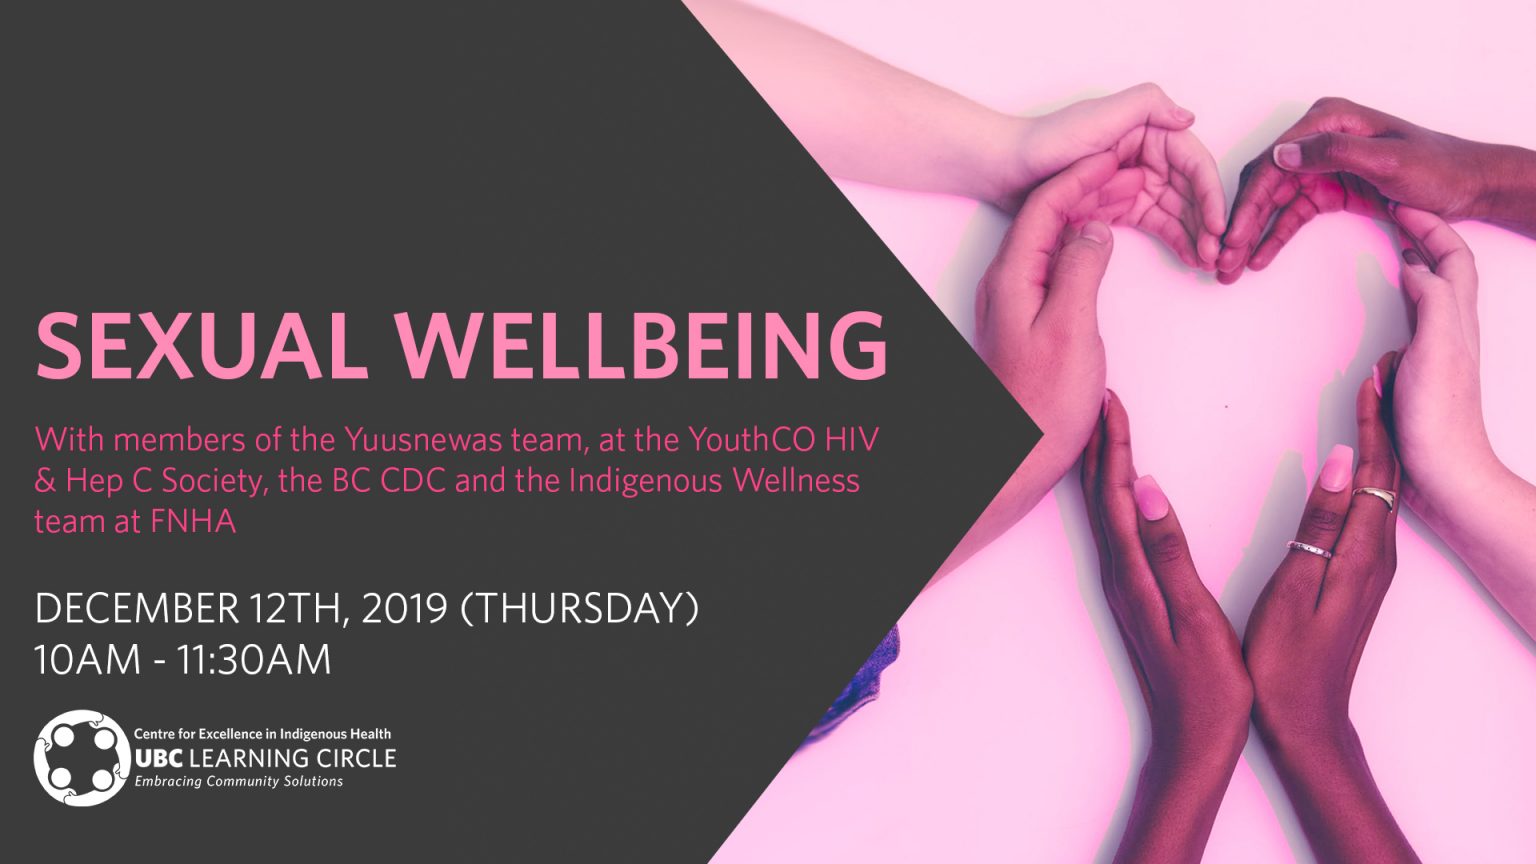 December 12th 2019 Sexual Wellbeing Ubc Learning Circle 